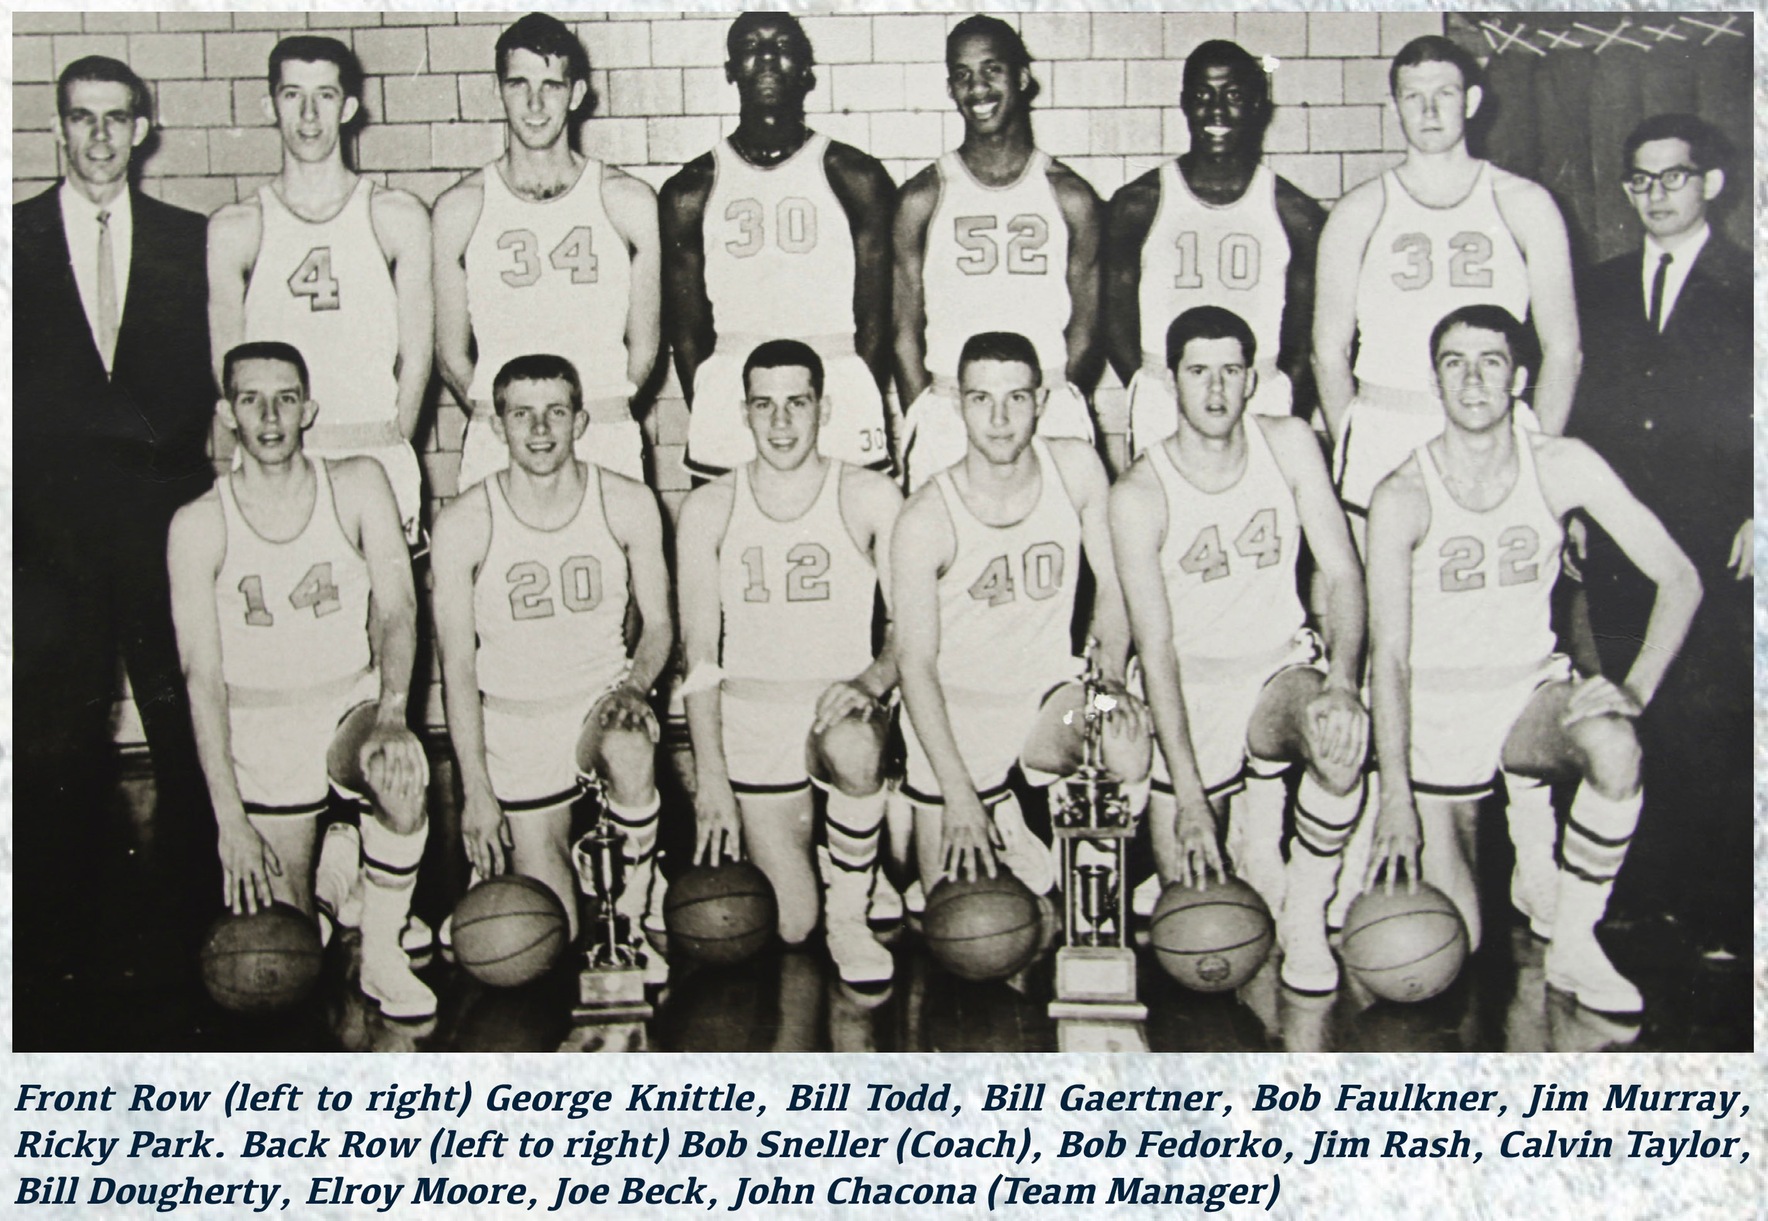 Team photo of the 1963 Men's Basketball National Championship Team